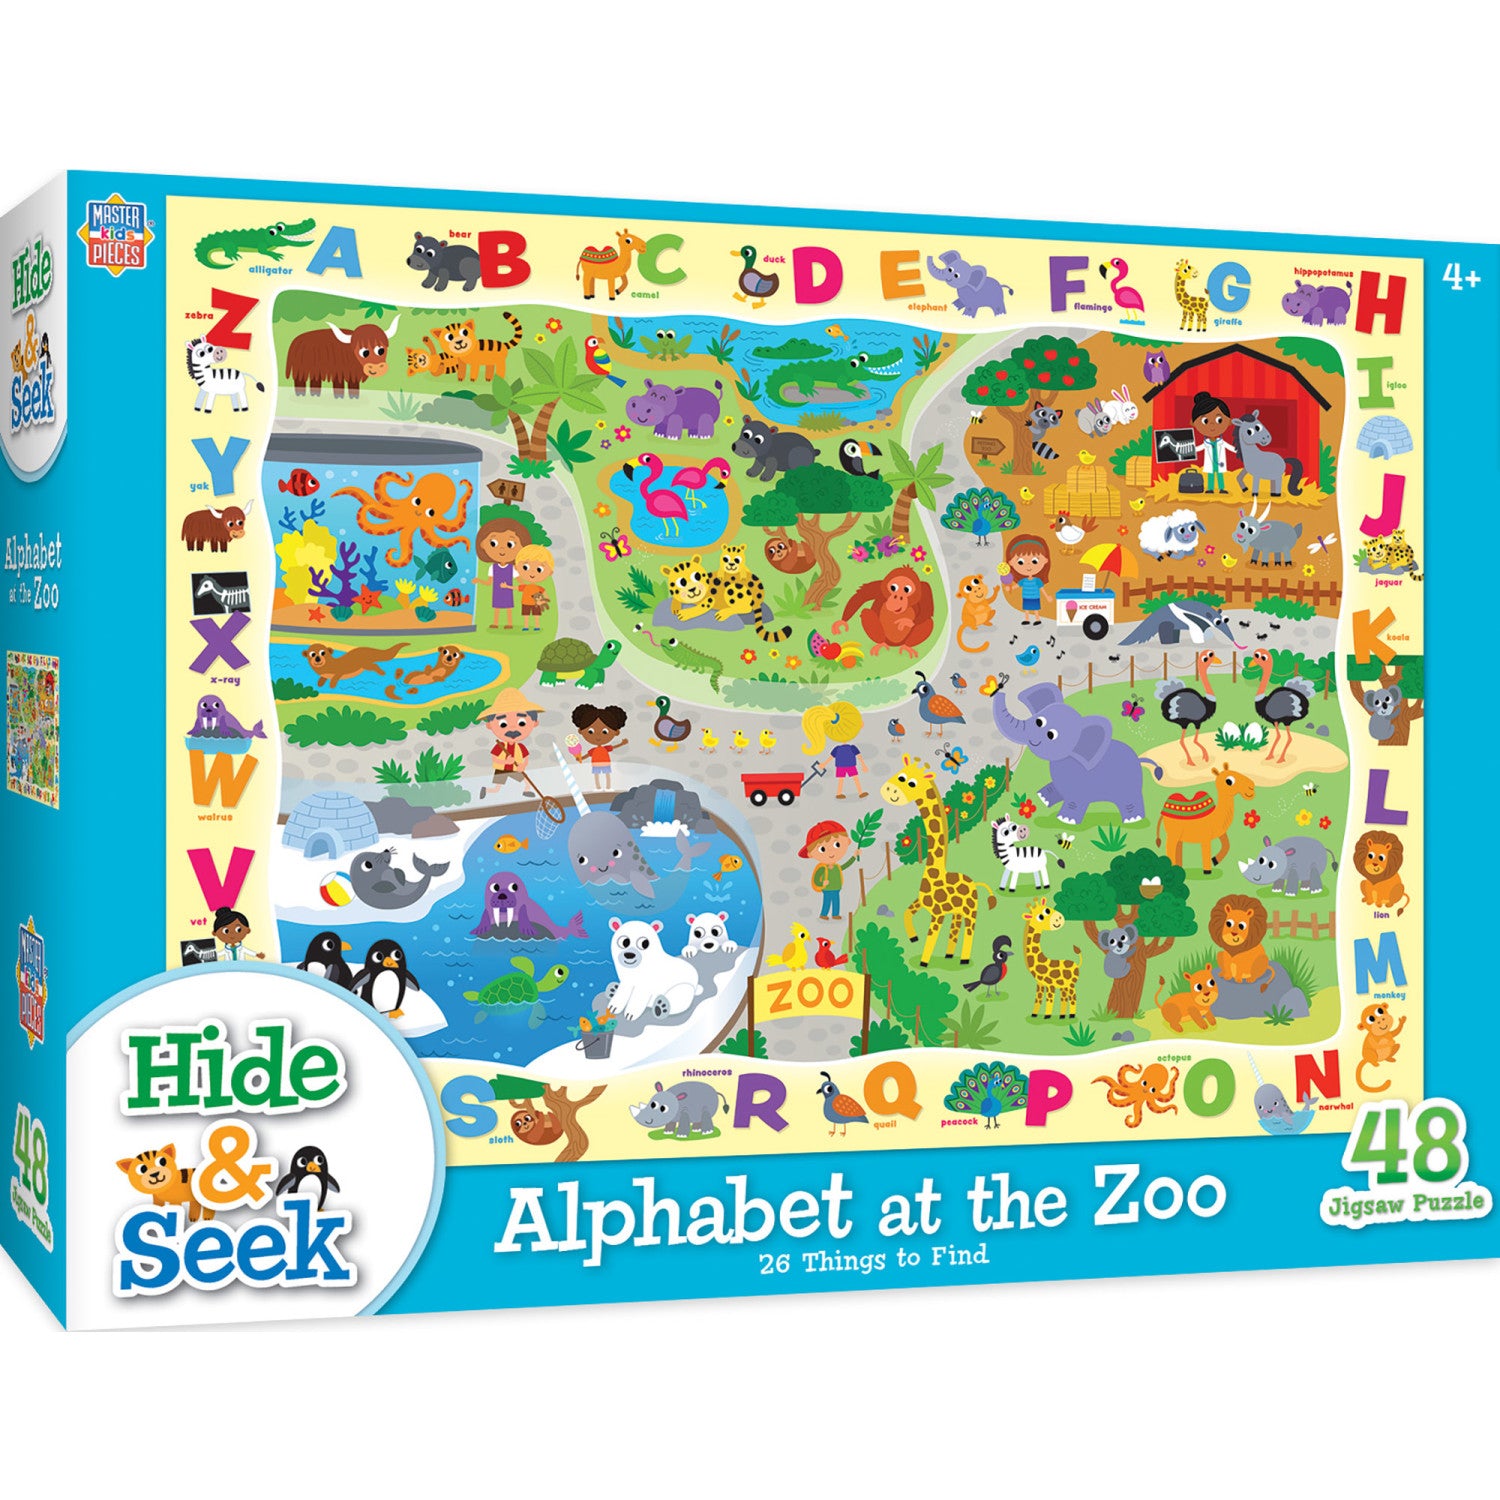 Hide & Seek - Alphabet at the Zoo 48 Piece Jigsaw Puzzle